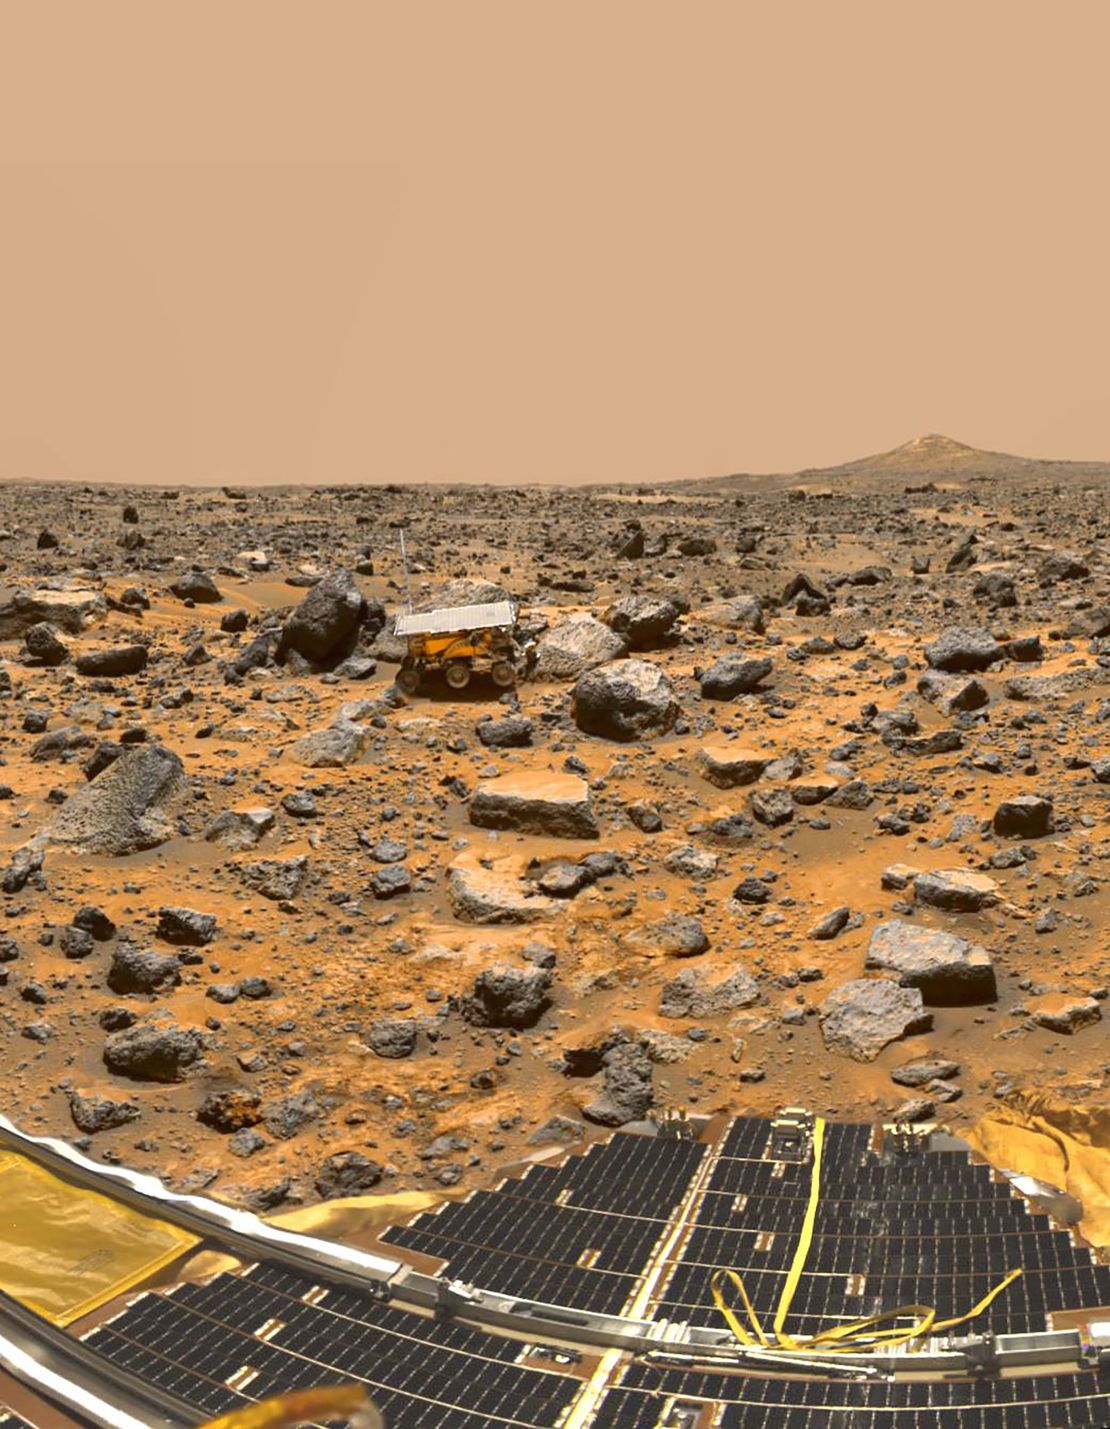 Hitching a ride on the Mars Pathfinder mission, the Sojourner rover arrived on July 4, 1997. 